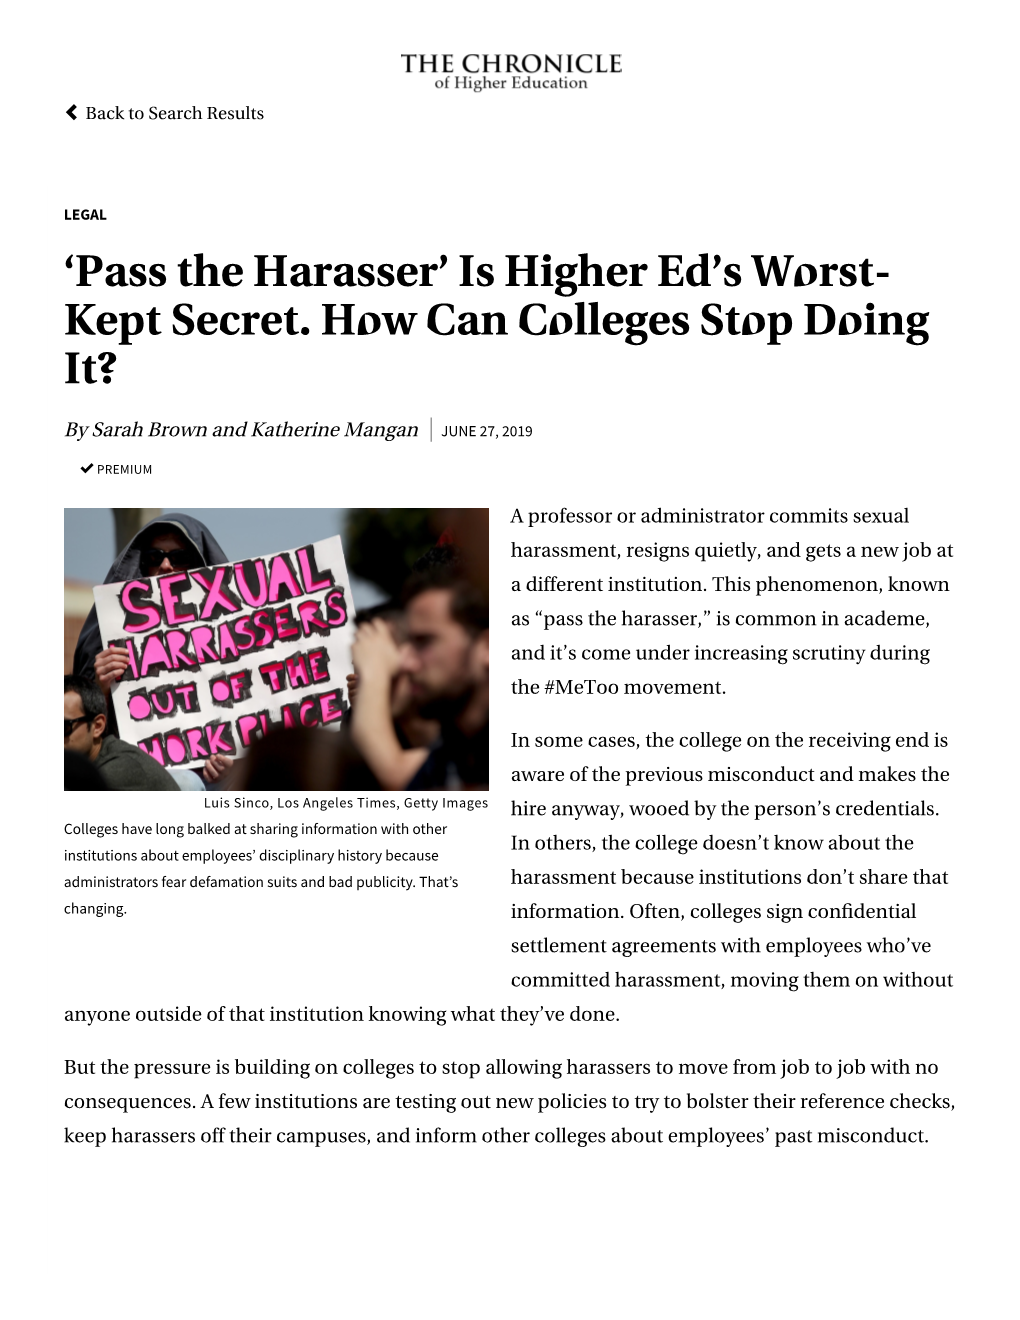 'Pass the Harasser' Is Higher Ed's Worst- Kept Secret. How Can Colleges Stop Doing